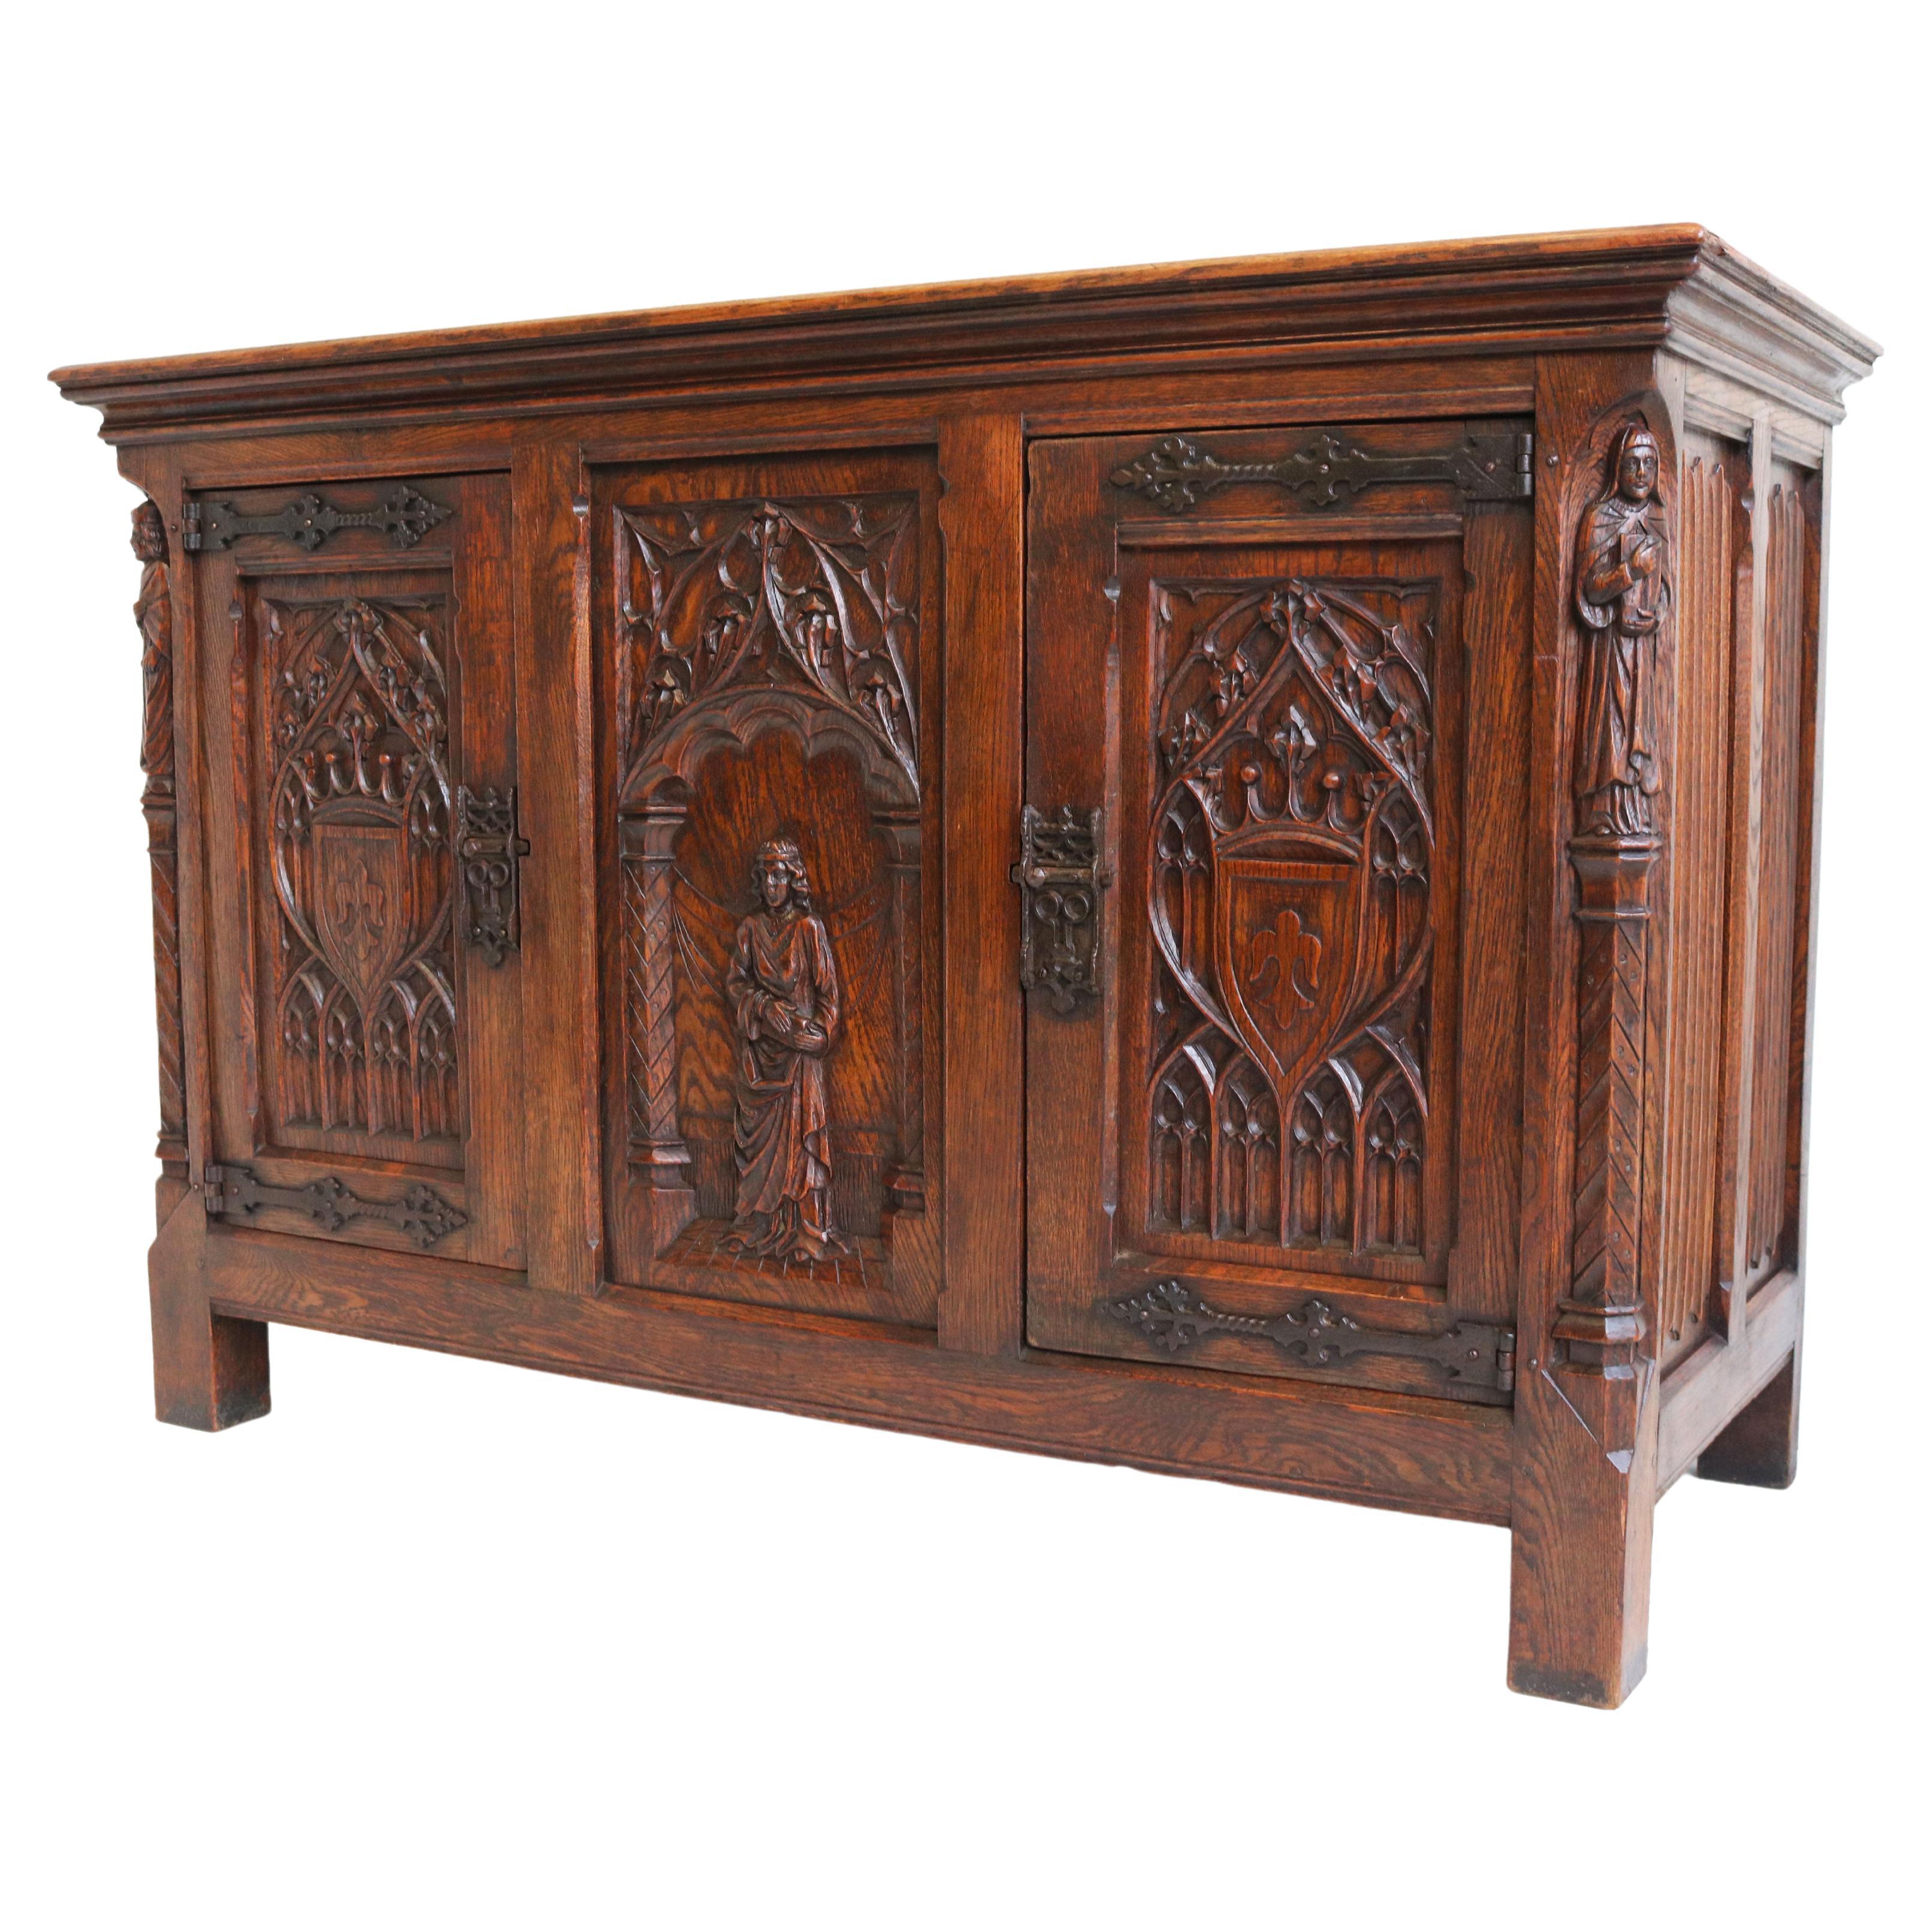 French Antique Gothic Revival Cabinet / Small Credenza 1920 Carved Figures Oak